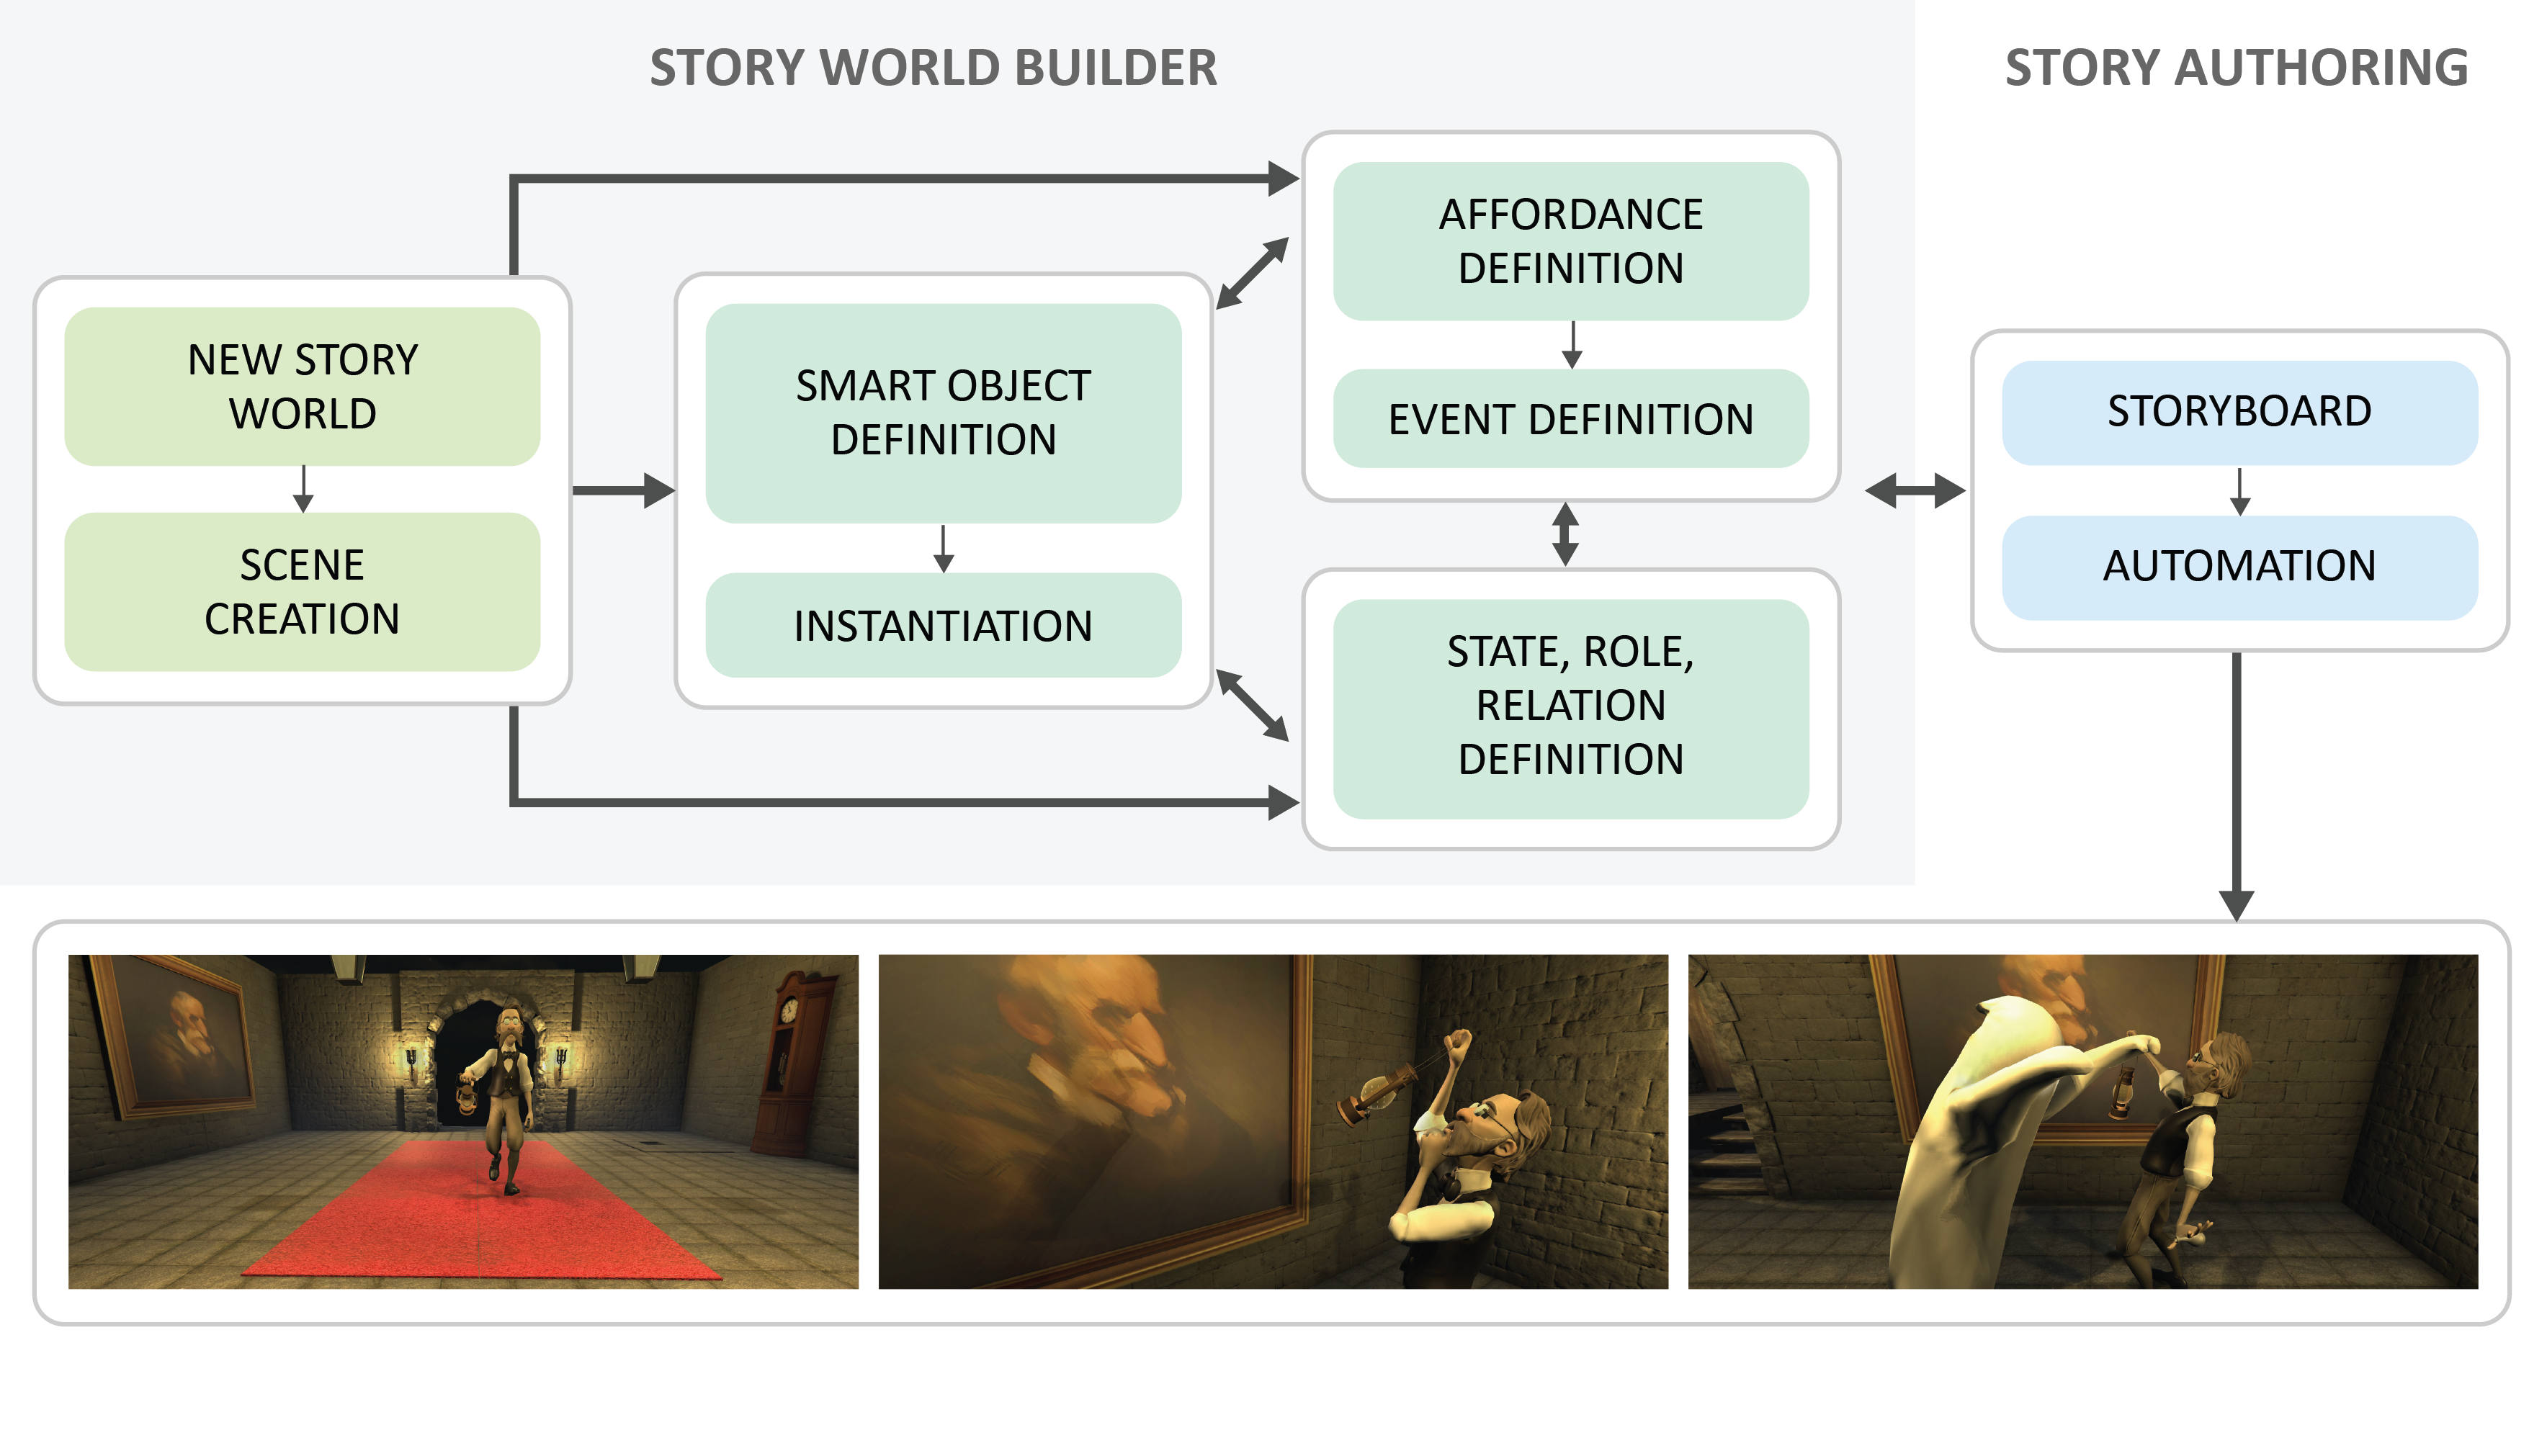 evaluating-accessible-graphical-interfaces-for-building-story-worlds-image